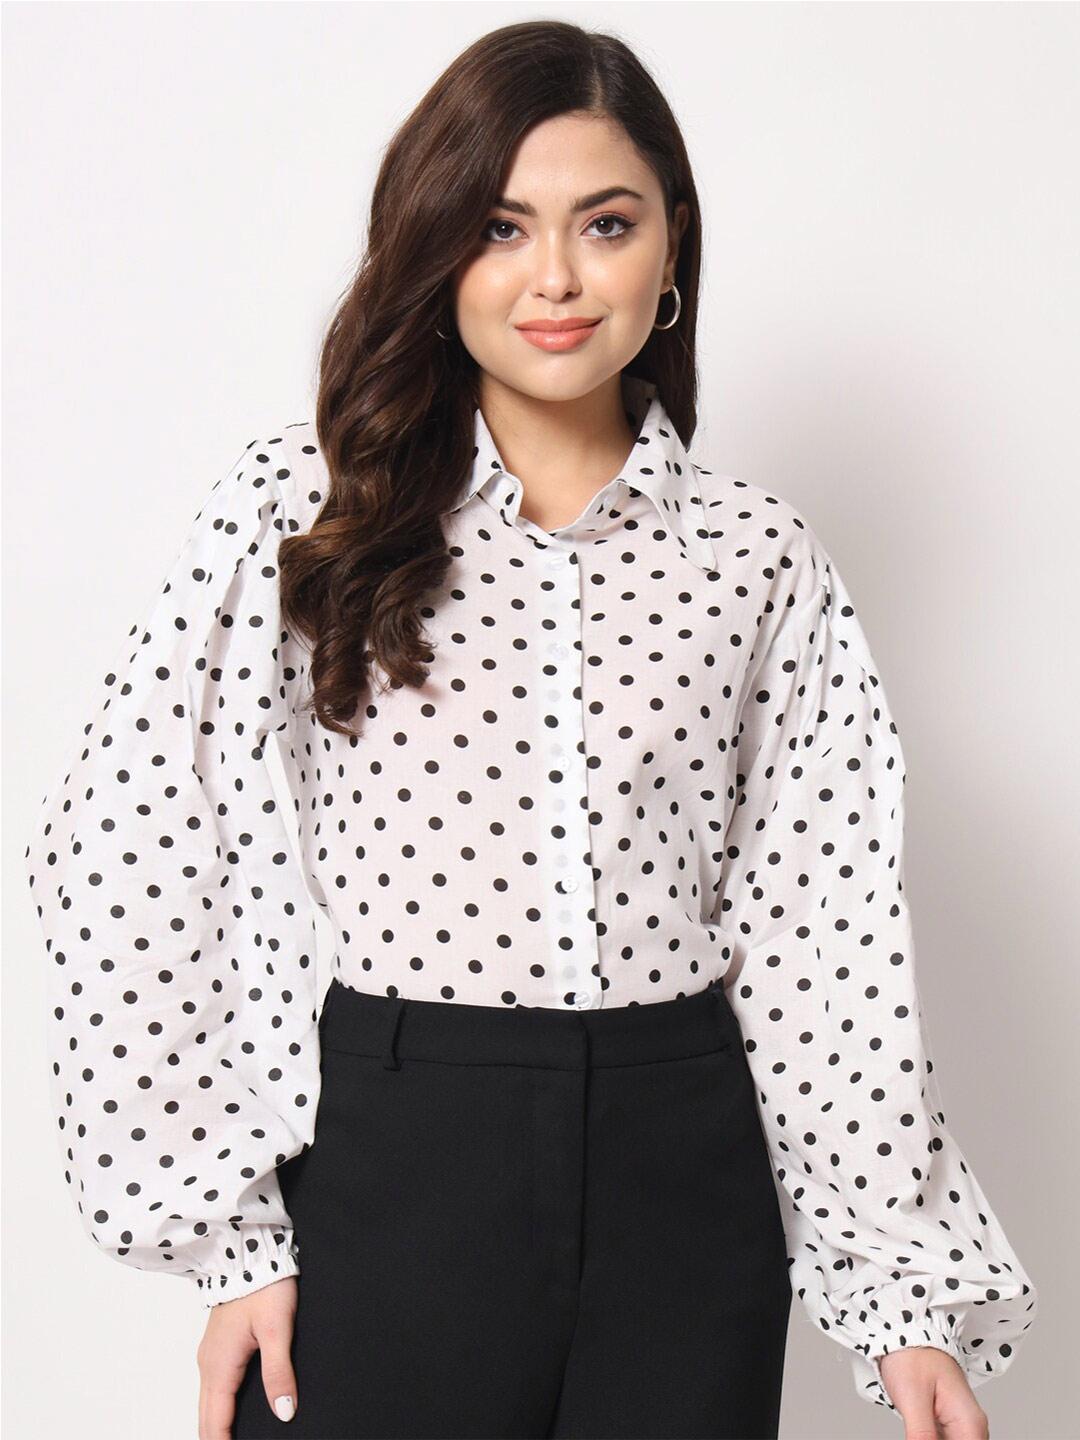 trend-arrest-women-contemporary-polka-dots-printed-formal-cotton-shirt